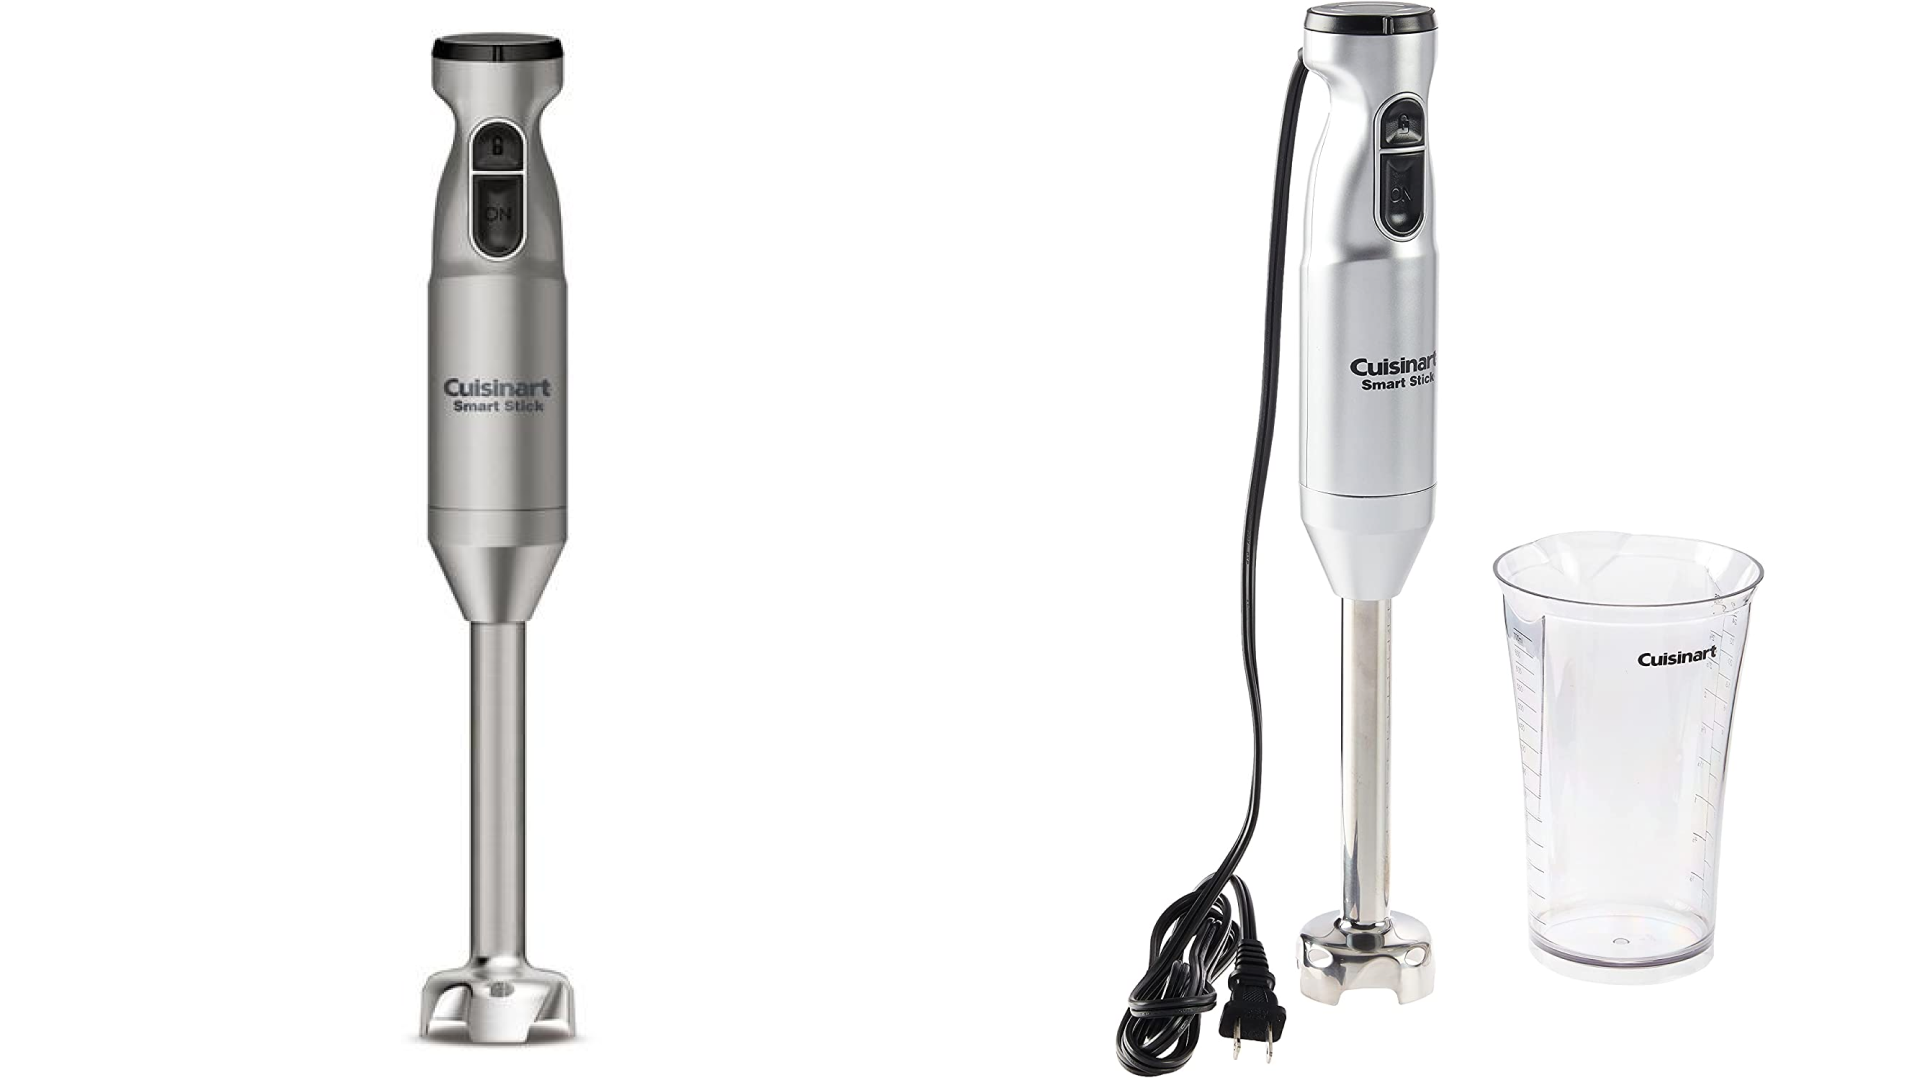 10 Best Immersion Blenders 2022 - Stick and Hand Blenders